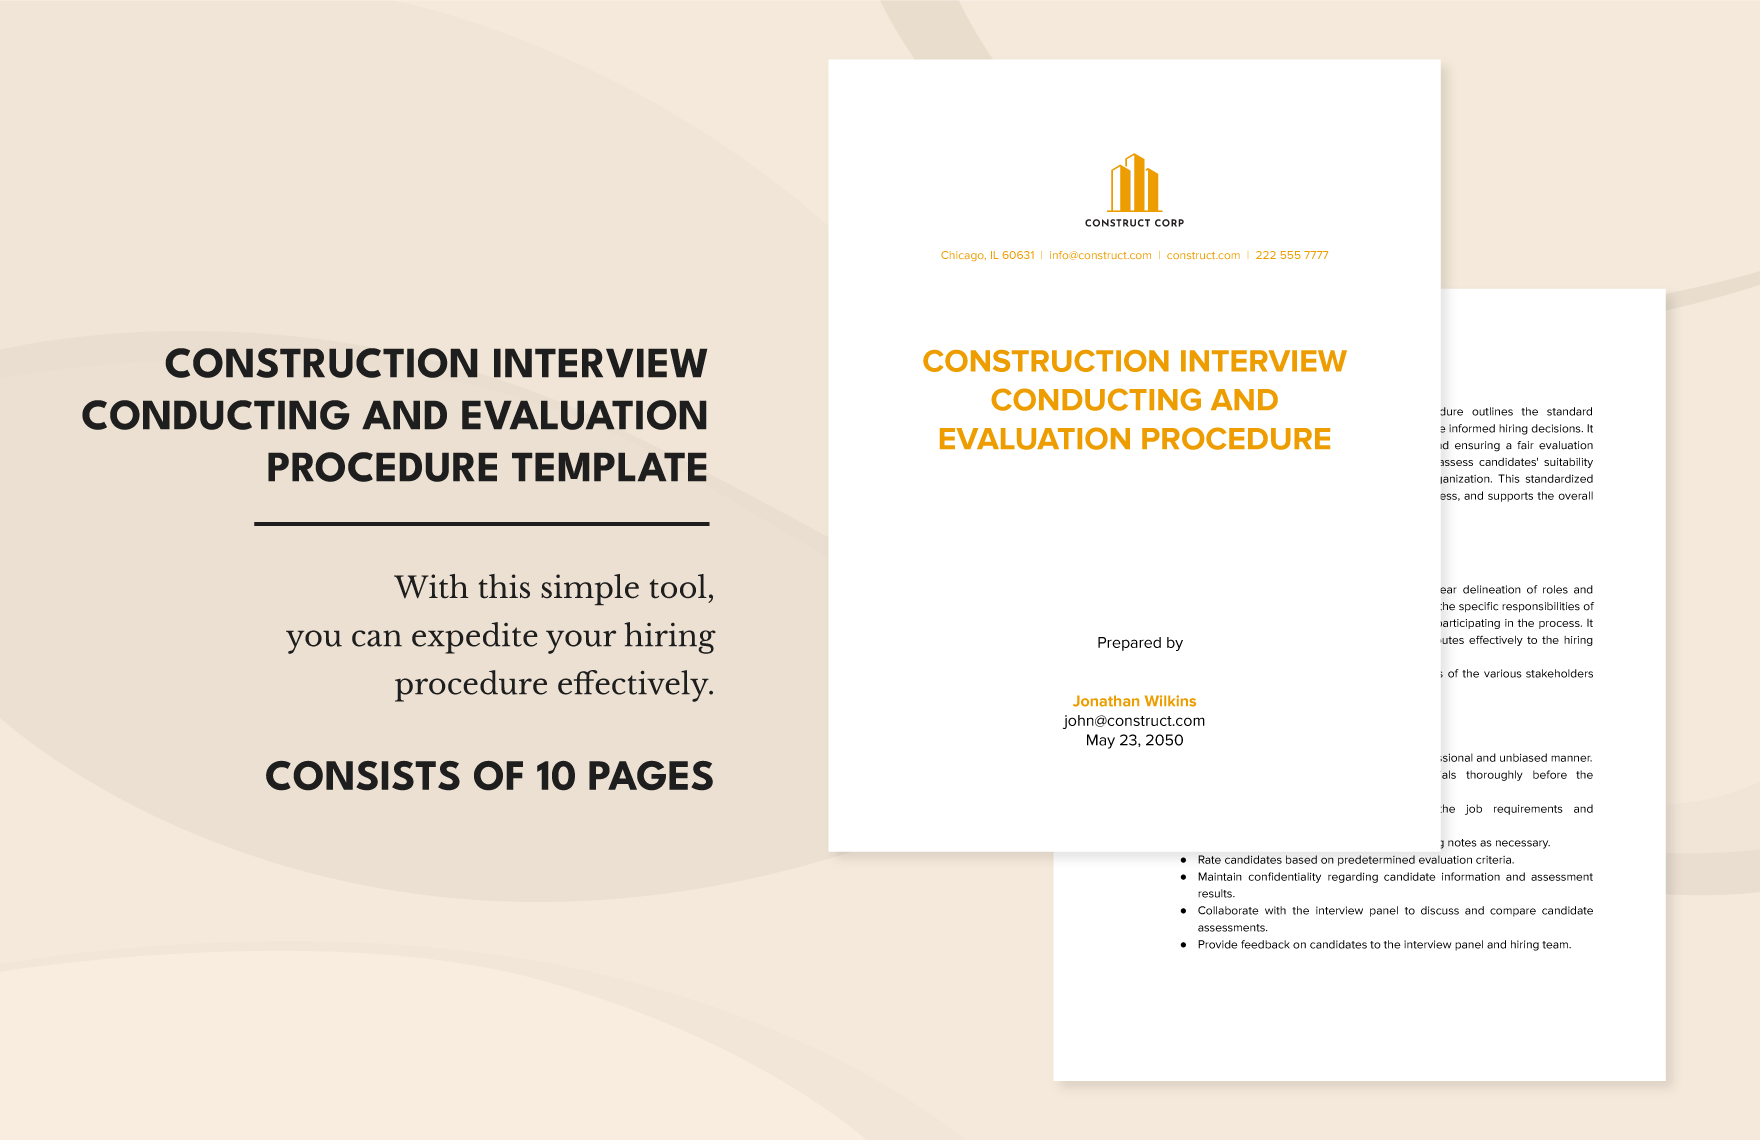 Construction Interview Conducting and Evaluation Procedure Template in Word, Google Docs